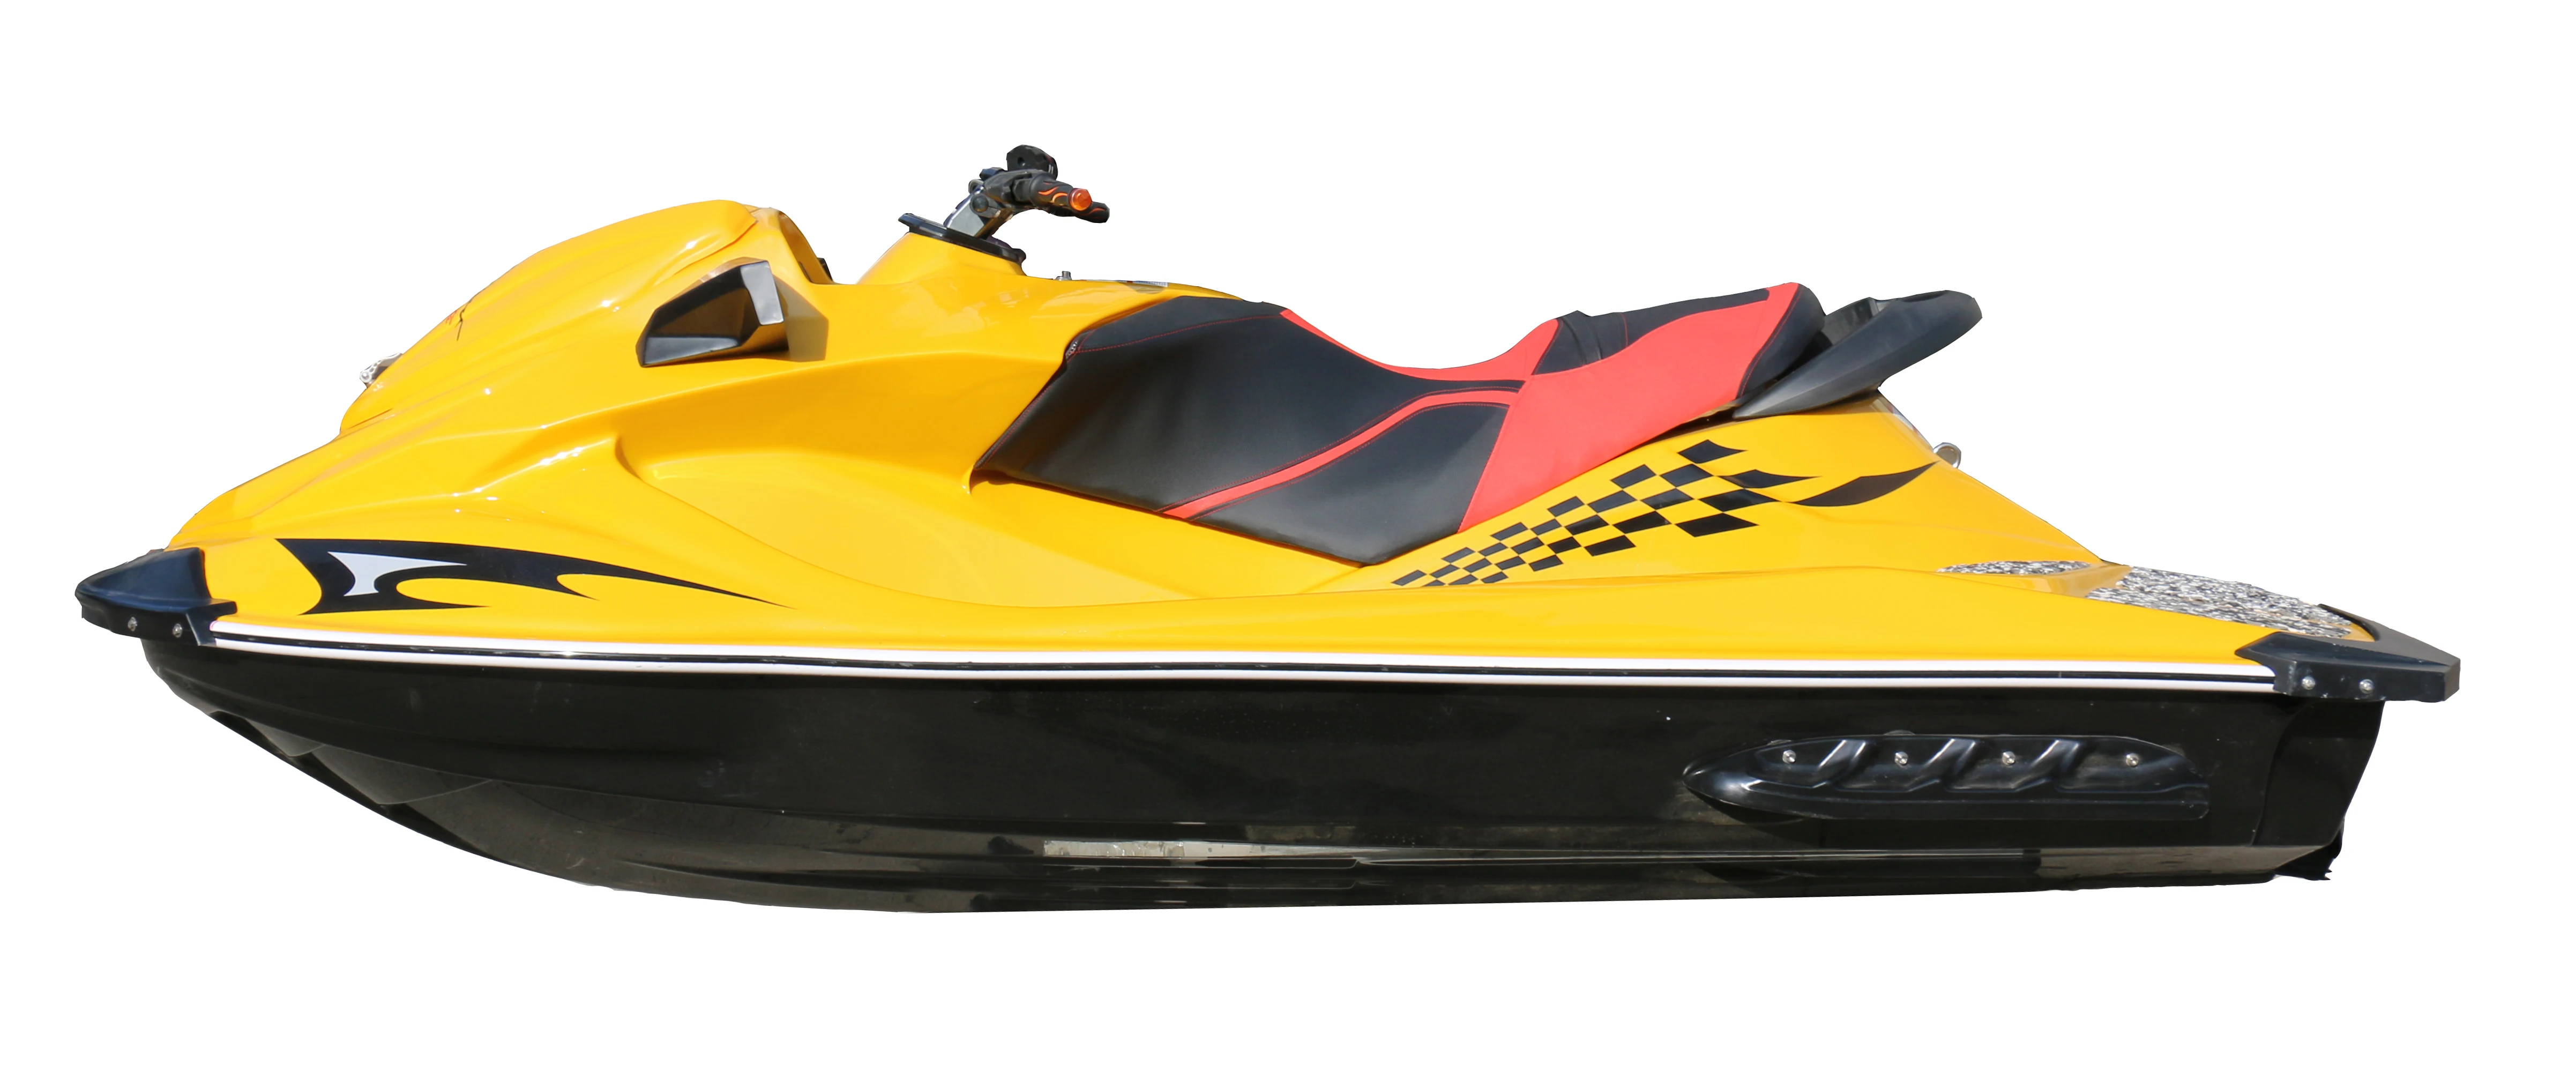 Four-stroke sailor Kawasaki of the new motorboat is similar to the Chinese motorboat private sailor motorbike jetski sea doo sea